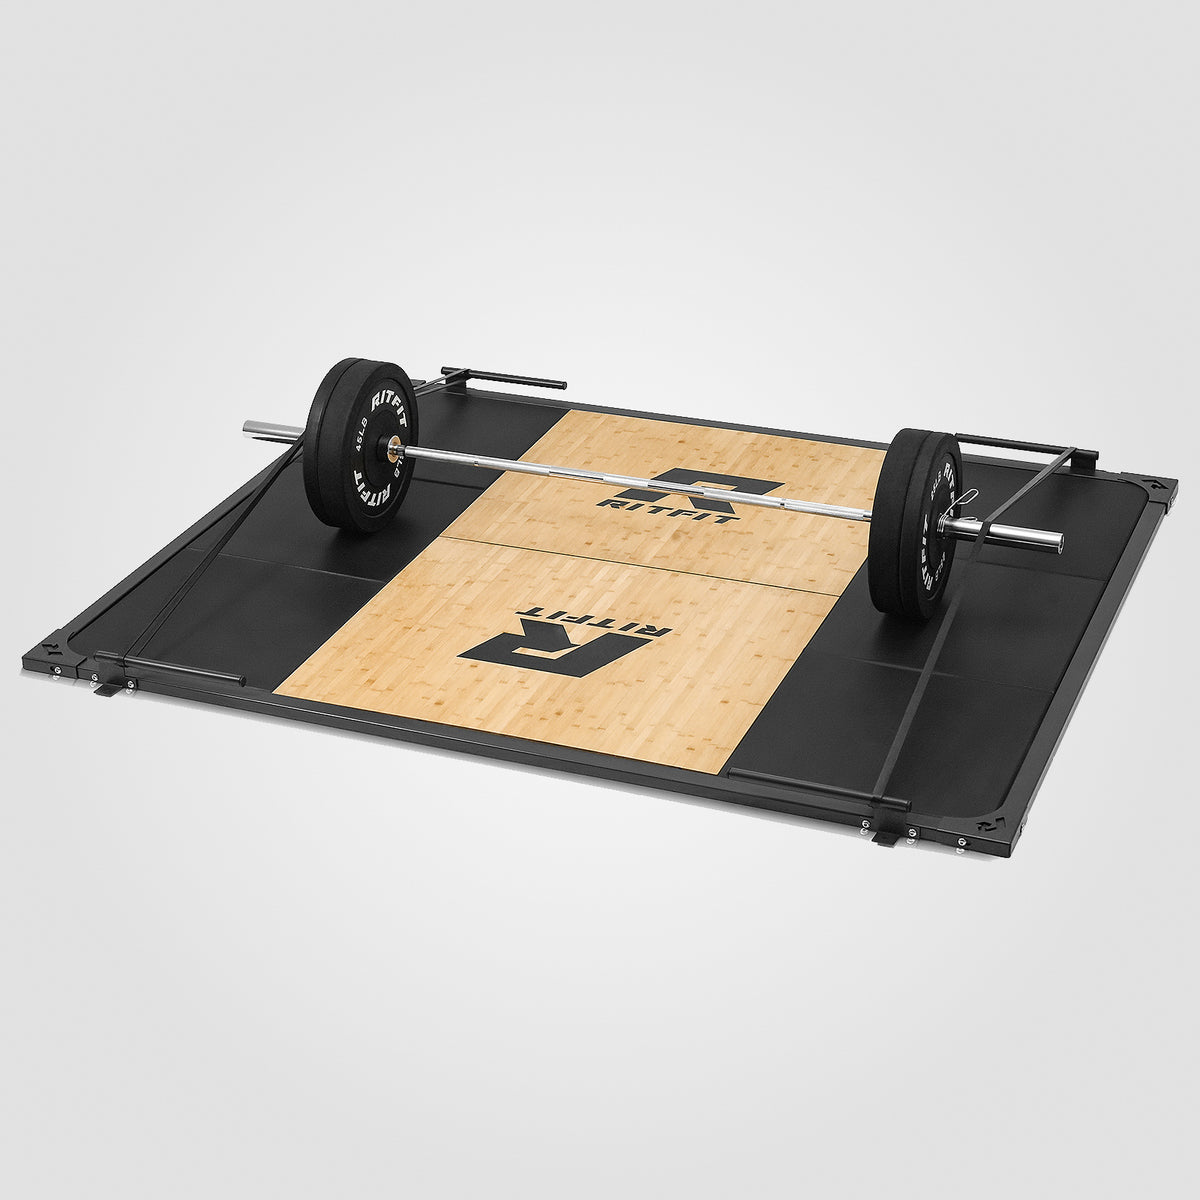 RitFit WLP01 Weightlifting Deadlift Platform Steel and Bamboo With Band Pegs - RitFit